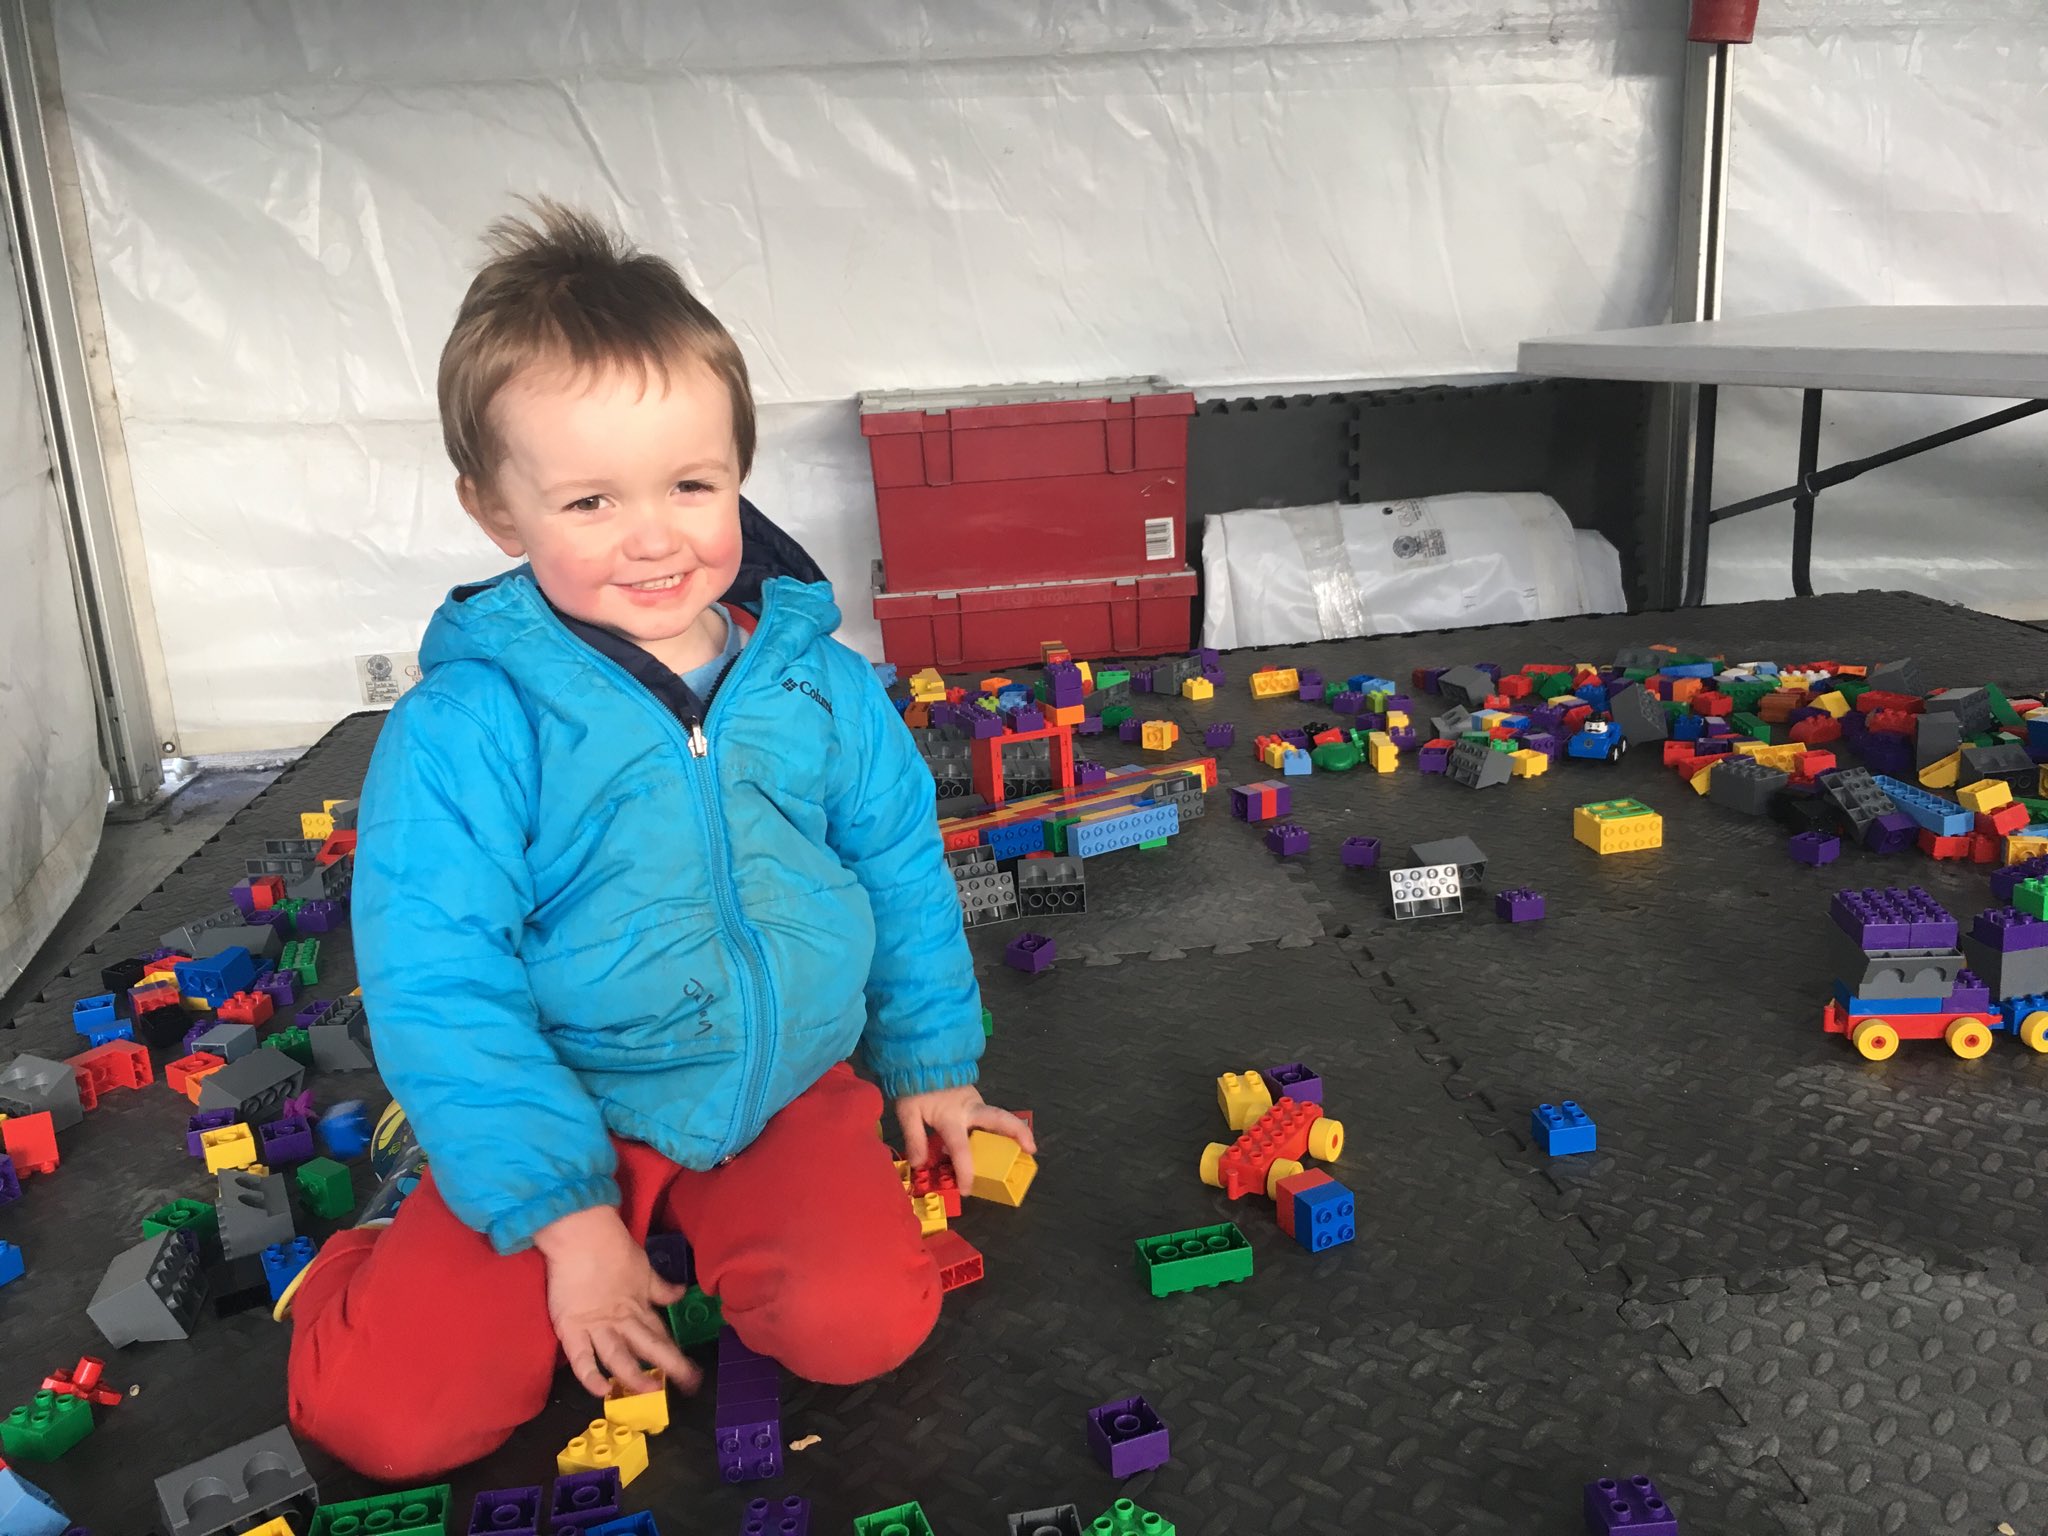 Julian sitting on the ground smiling at the camera dressed in a blue winter coat and red pants. The ground covering is black rubbery tiles and strewn about are brightly colored Duplo bricks.